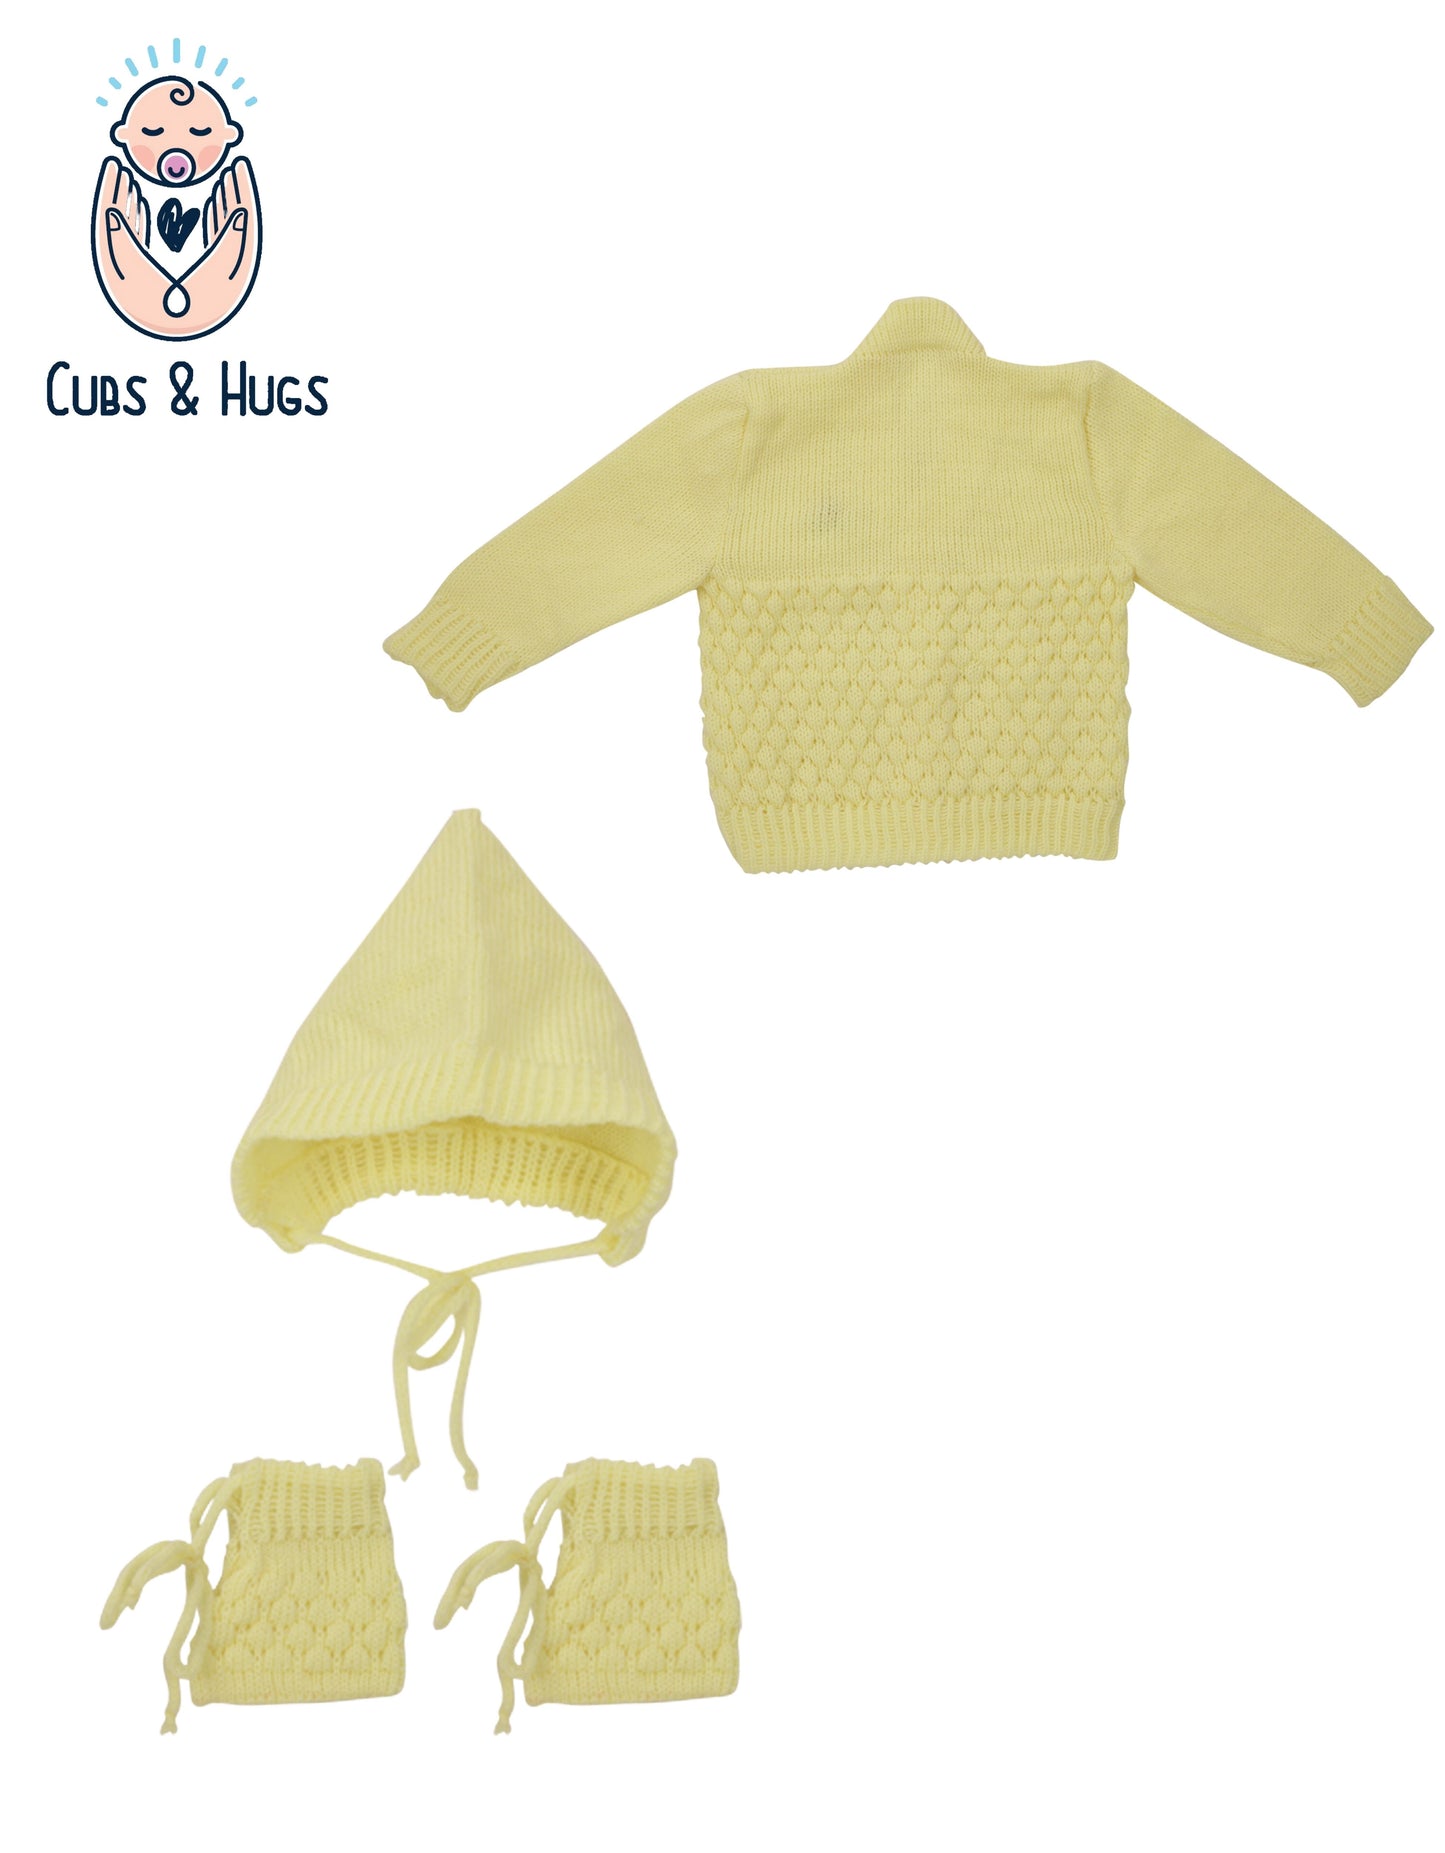 Soft Knitted Baby Sweater Warm and Cozy- Lemon